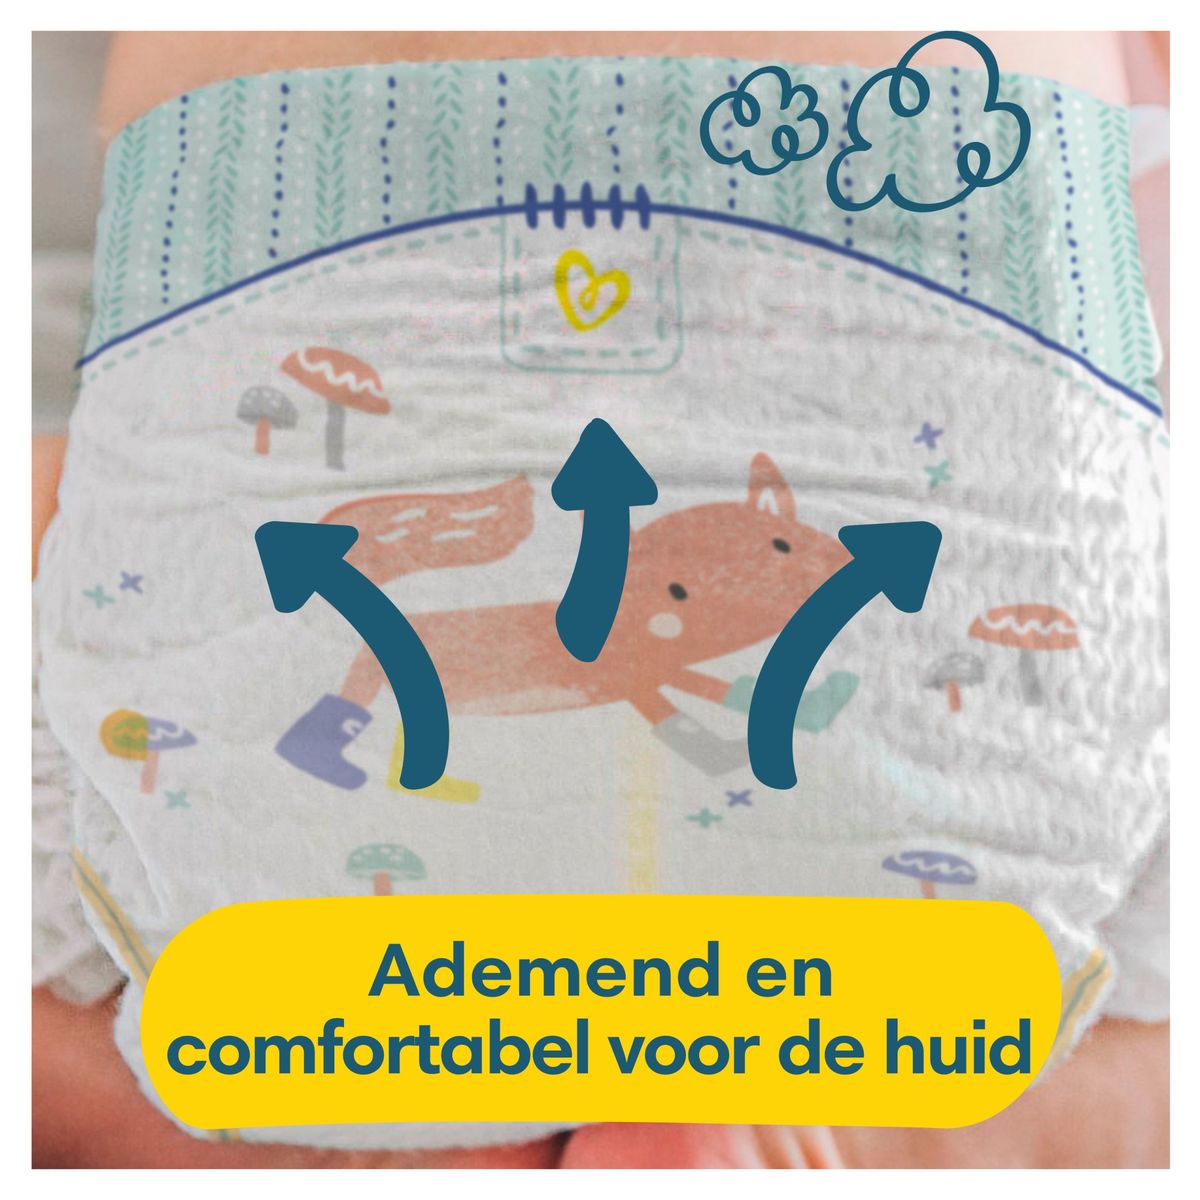 Pampers Premium Protection Taille 6, x19 Langes